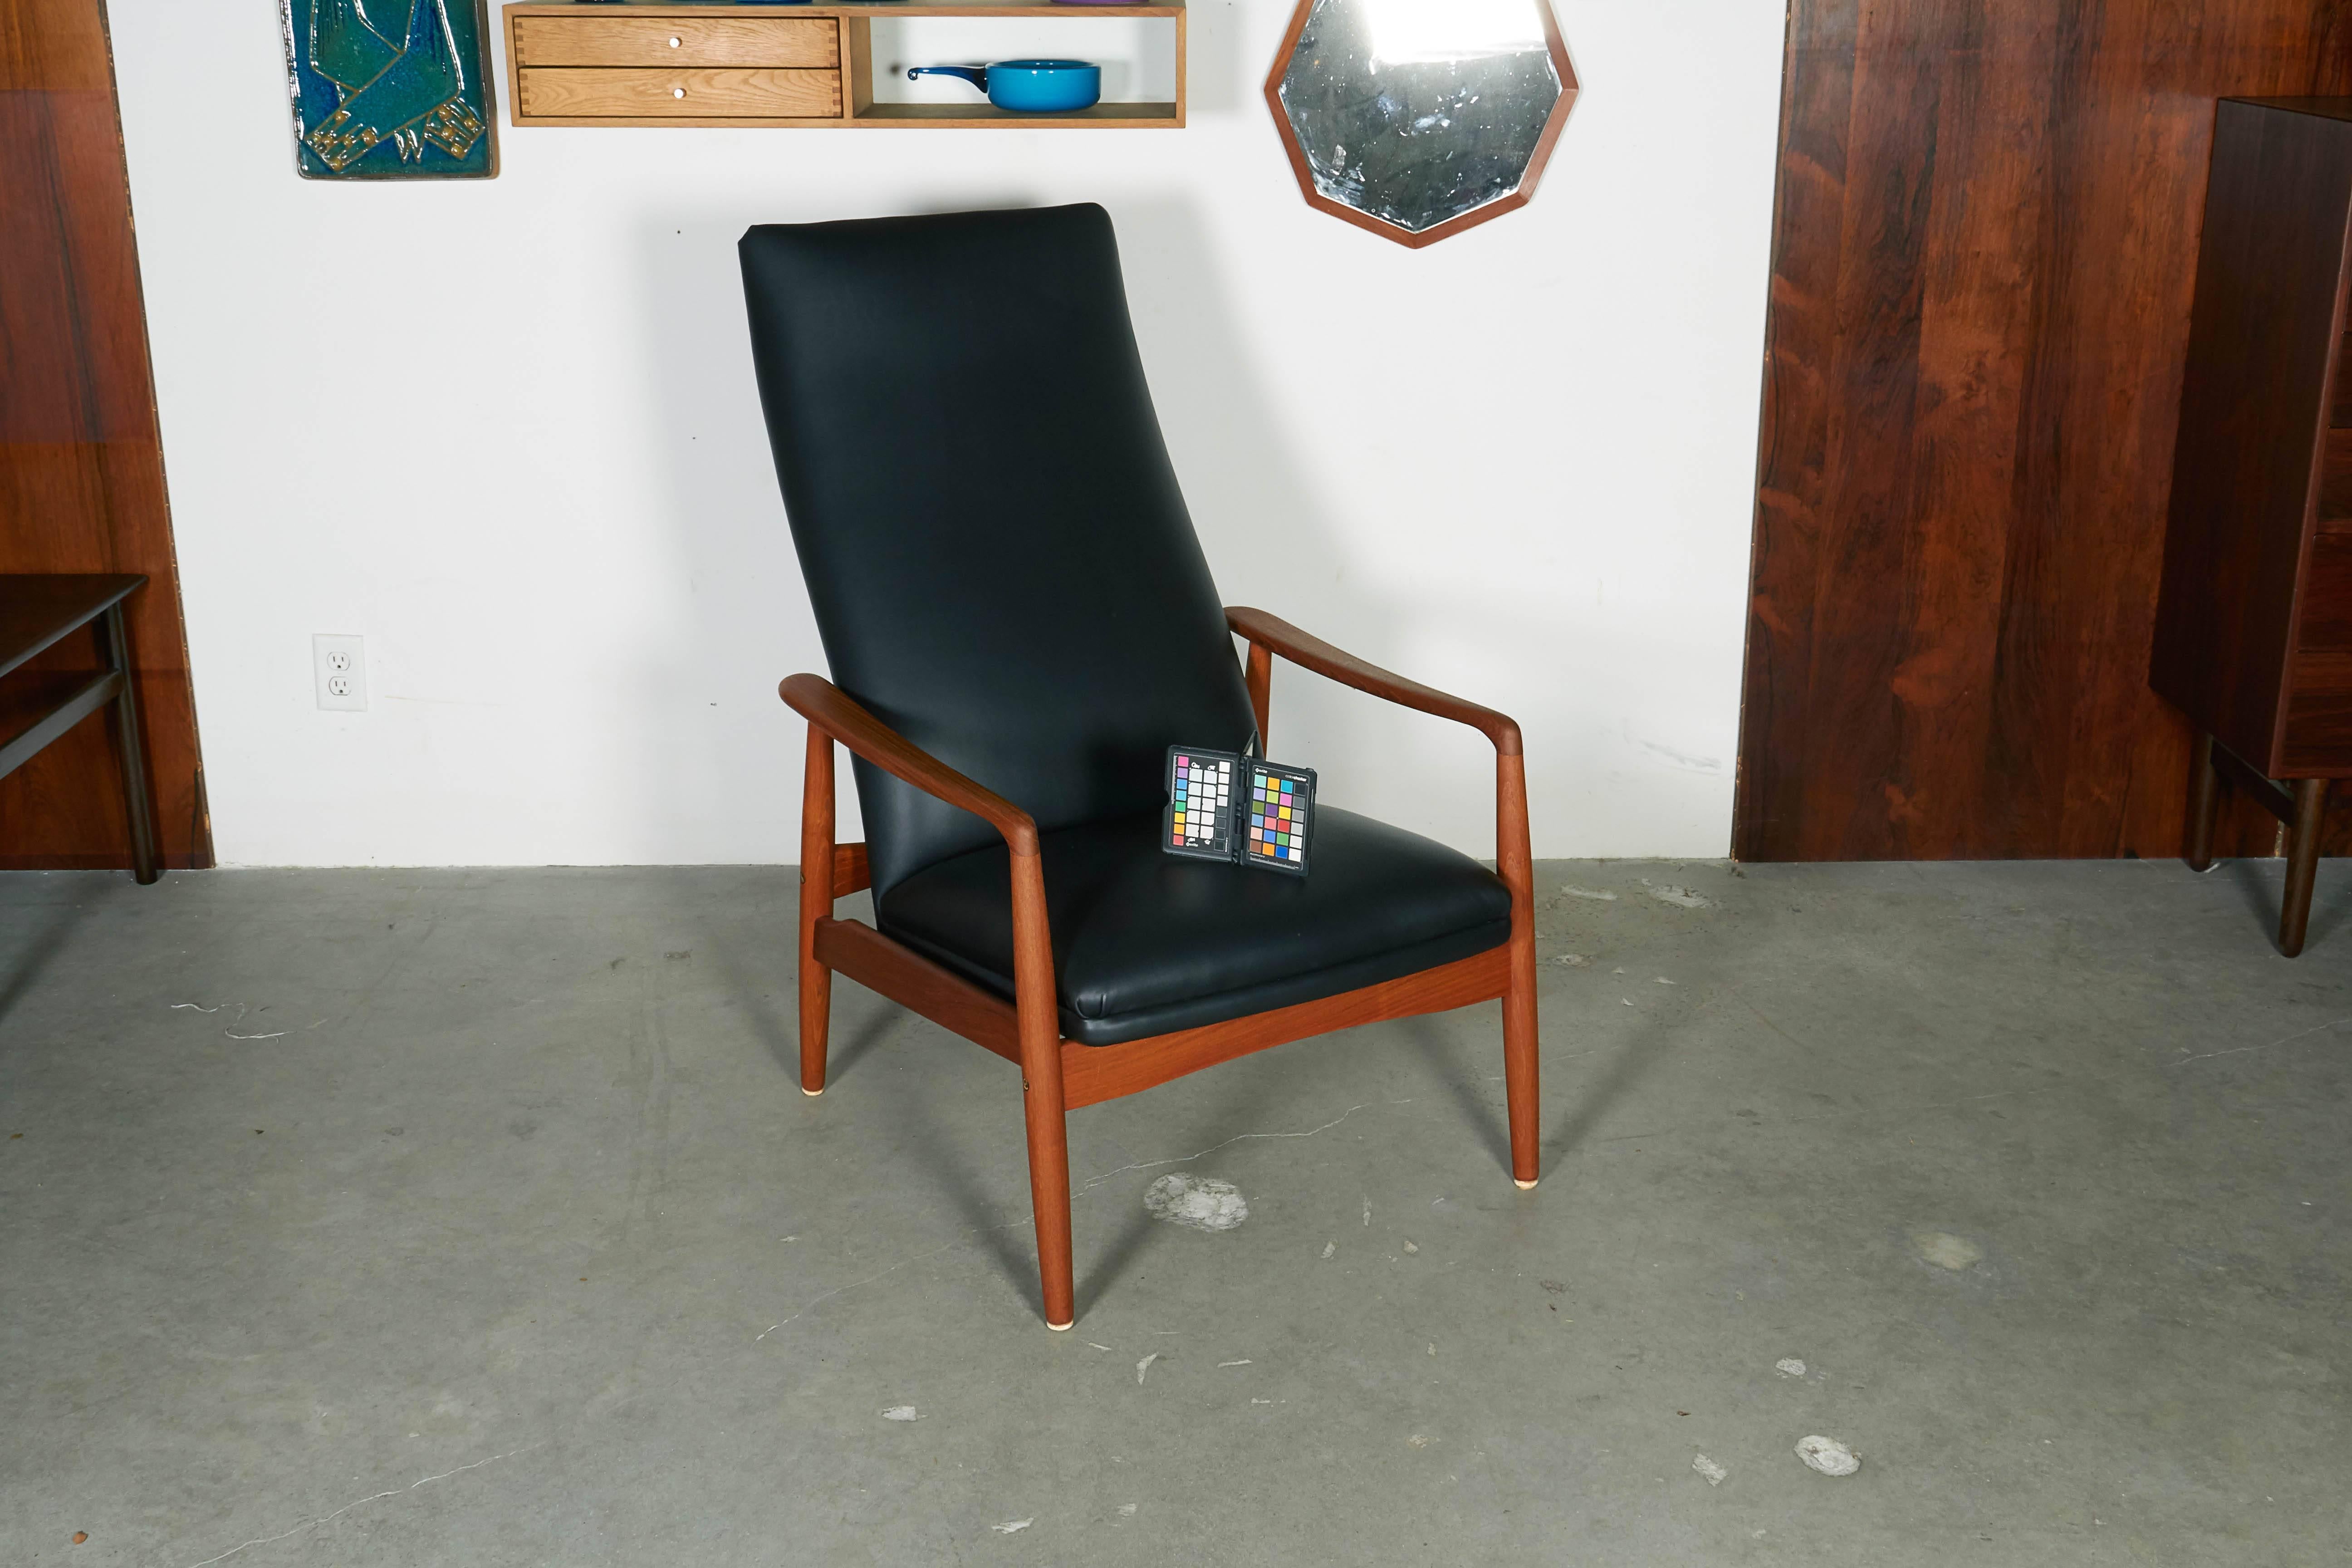 Vintage 1950s Teak Recliner Arm Chair

This mid century leather recliner is in excellent condition, and newly upholstered in a lovely matte black Italian leather. Simple reclining mechanism that never fails. Amazingly comfy. Ready for pick up,  